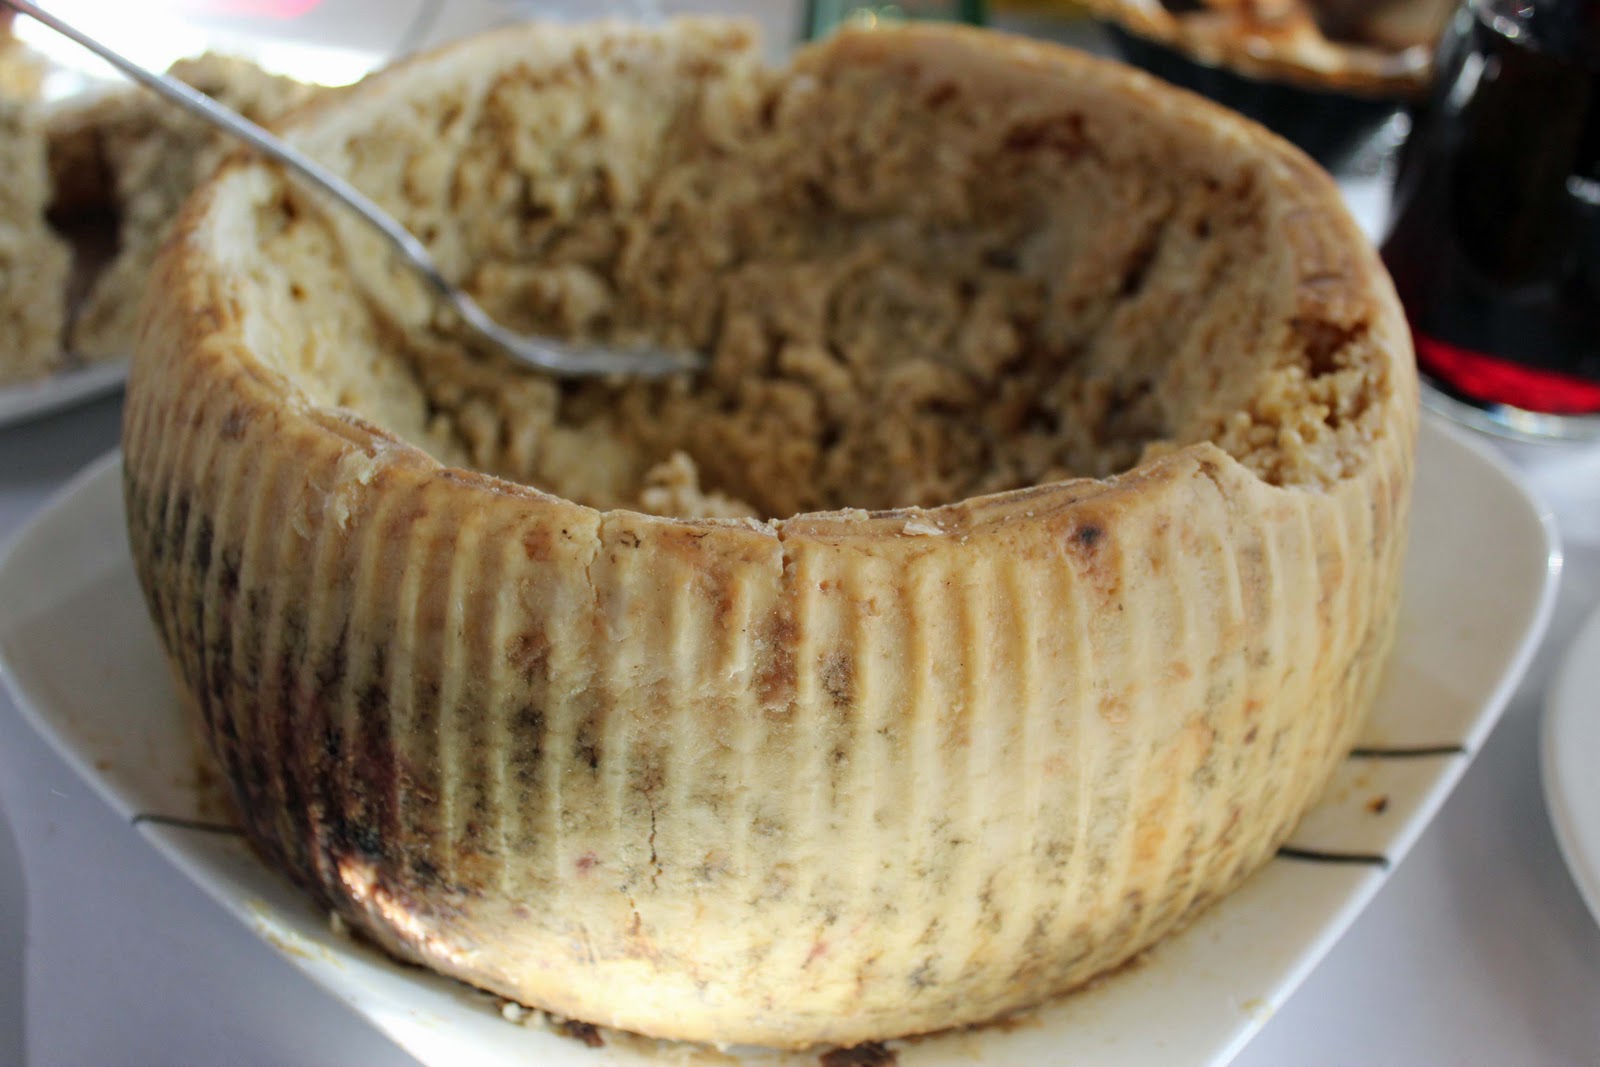 Reason: Casu marzu, a traditional Sardinian cheese, develops when cheese fly larvae are introduced into Pecorino to promote advanced fermentation. As the larvae hatch and eat through the cheese, it softens.